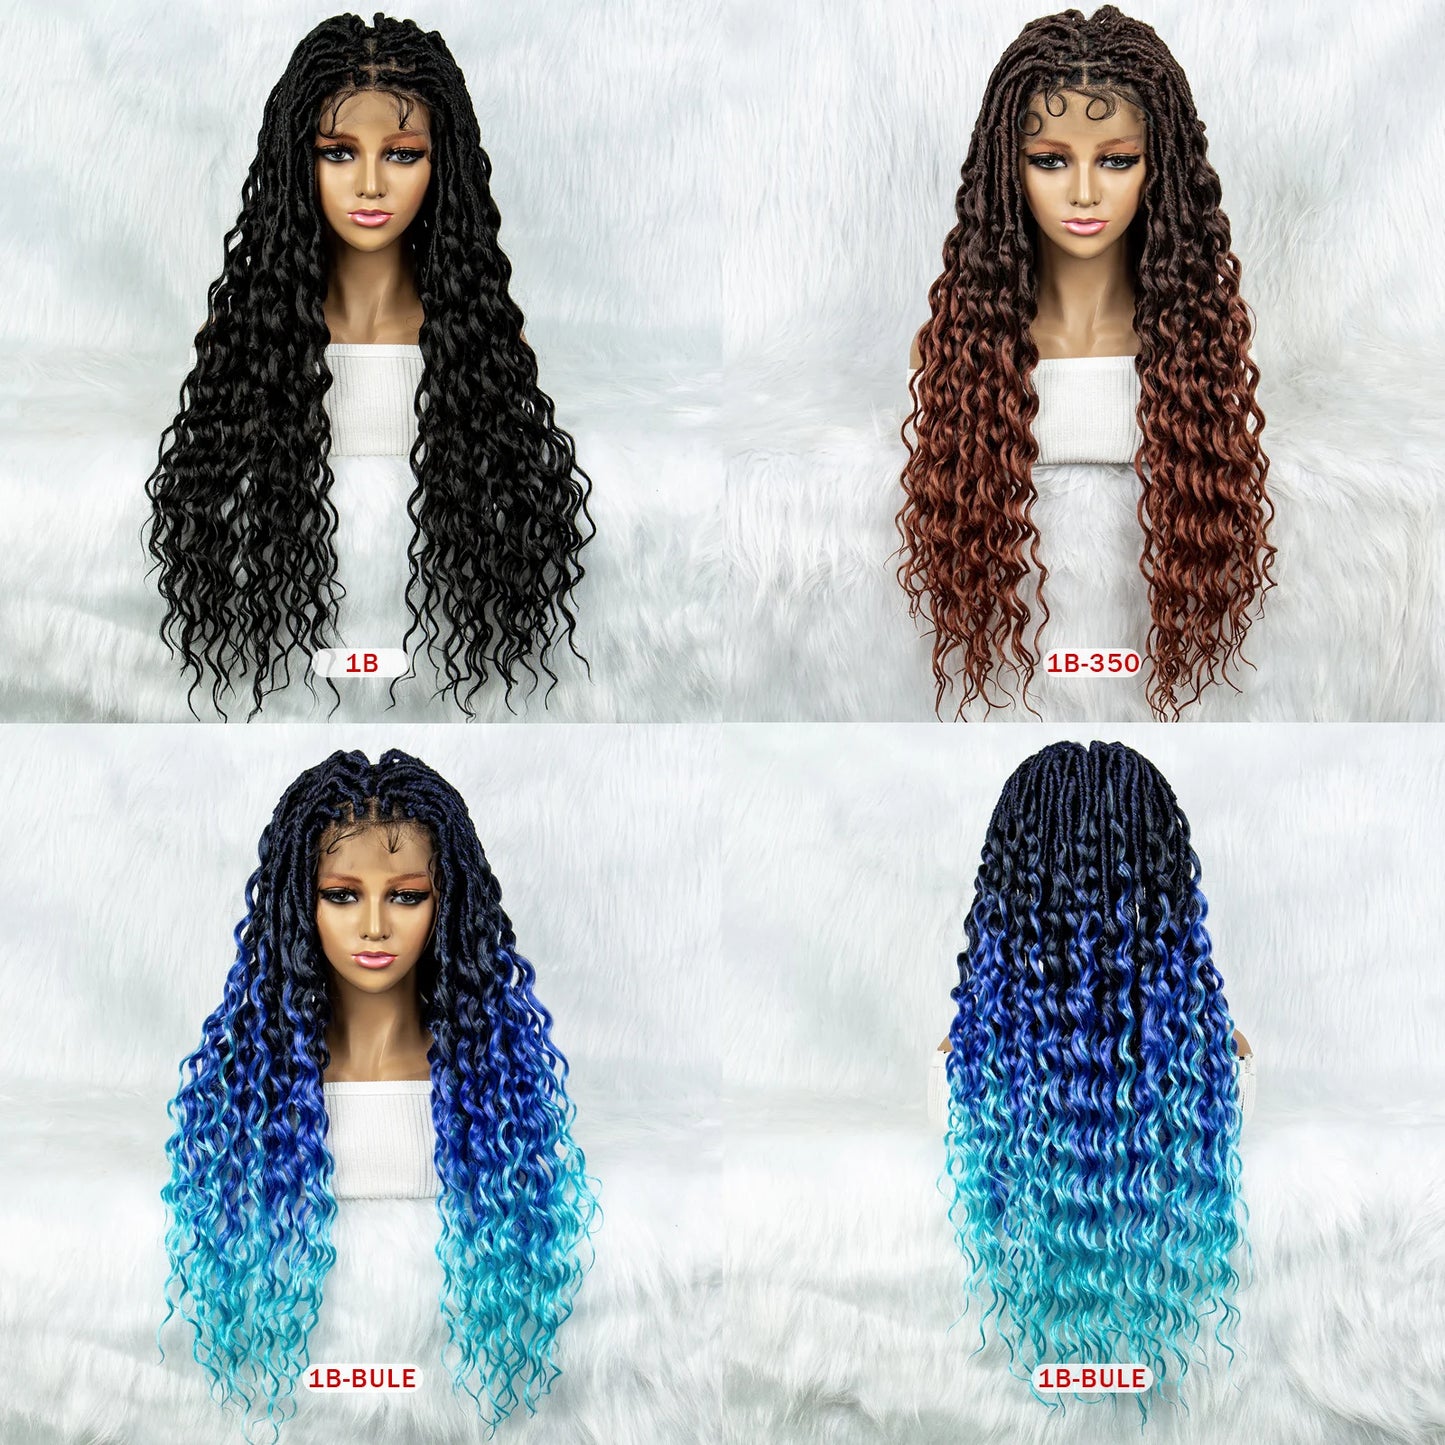 Synthetic Full Lace Wig Braided Wigs, 28 Inches Braiding Hair Knotless Box Braids Wigs With Water Wave